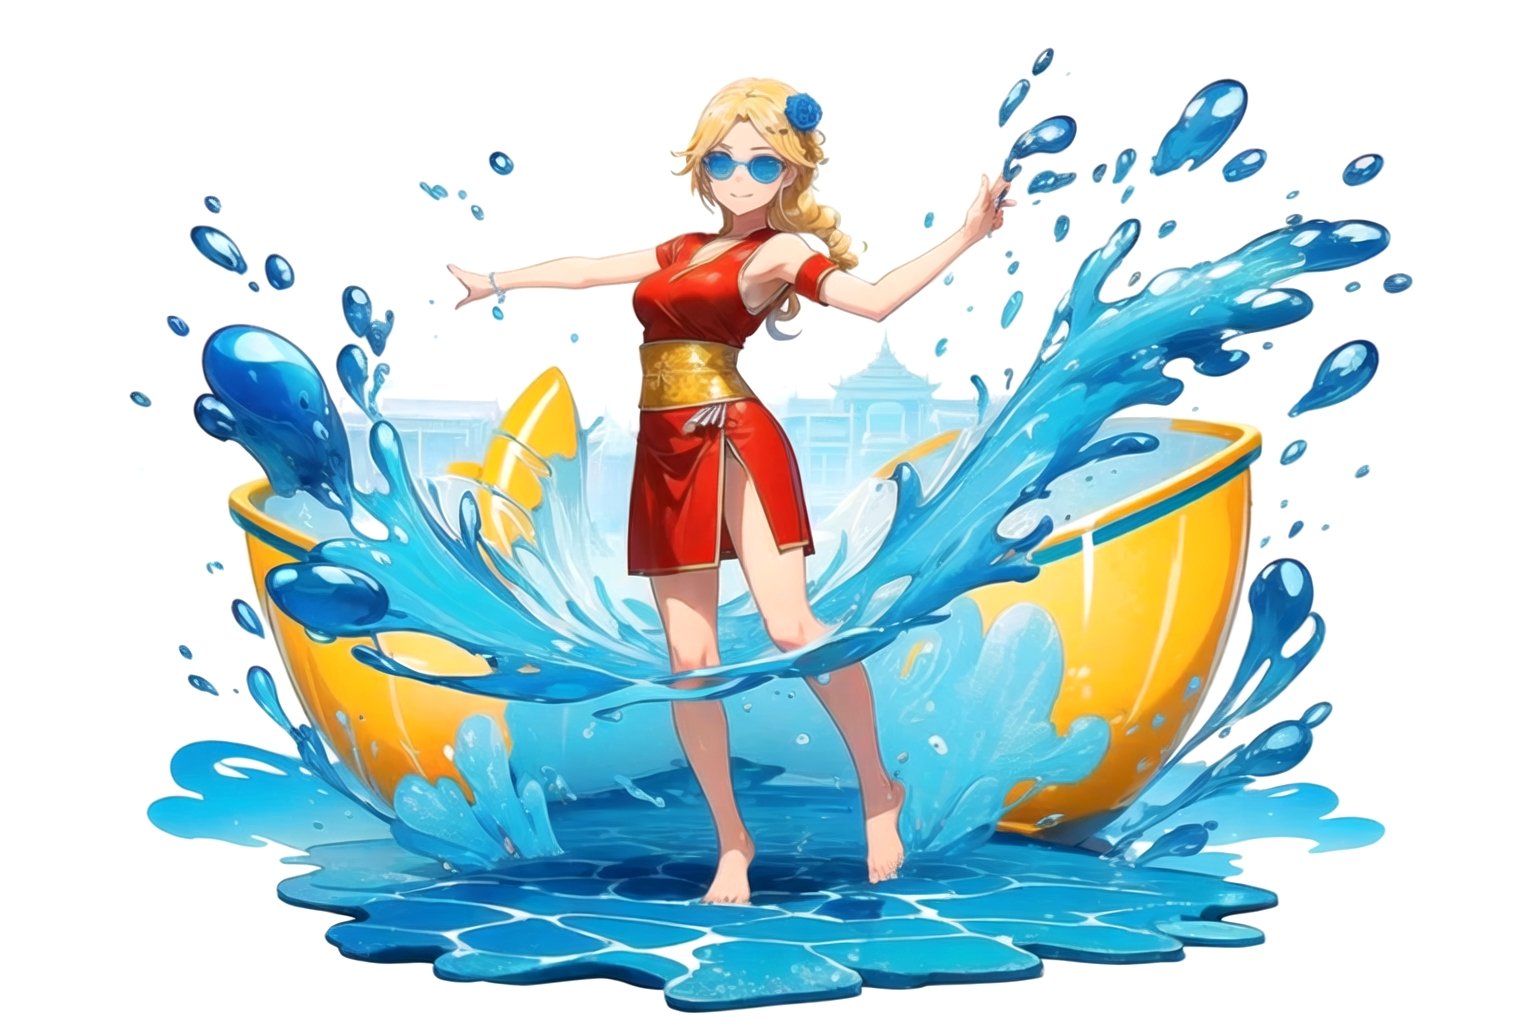 //Quality, (masterpiece), (best quality), 8k illustration,
//Character,
1girl , solo, 

 ,,Laykus, long hair, blonde hair, green eyes, hair ornament, one-sided big braid hair, one blue rose on her head,Songkran Festival,

water splash, water festival, water gun, sand castle, water bucket, golden pagoda, golden temple, festival flags, effect of flowing water, colorful style, Thailand decoration, colorful swimming glasses,

joyfully splashing water during the Songkran festival, capturing the vibrant atmosphere of celebration.